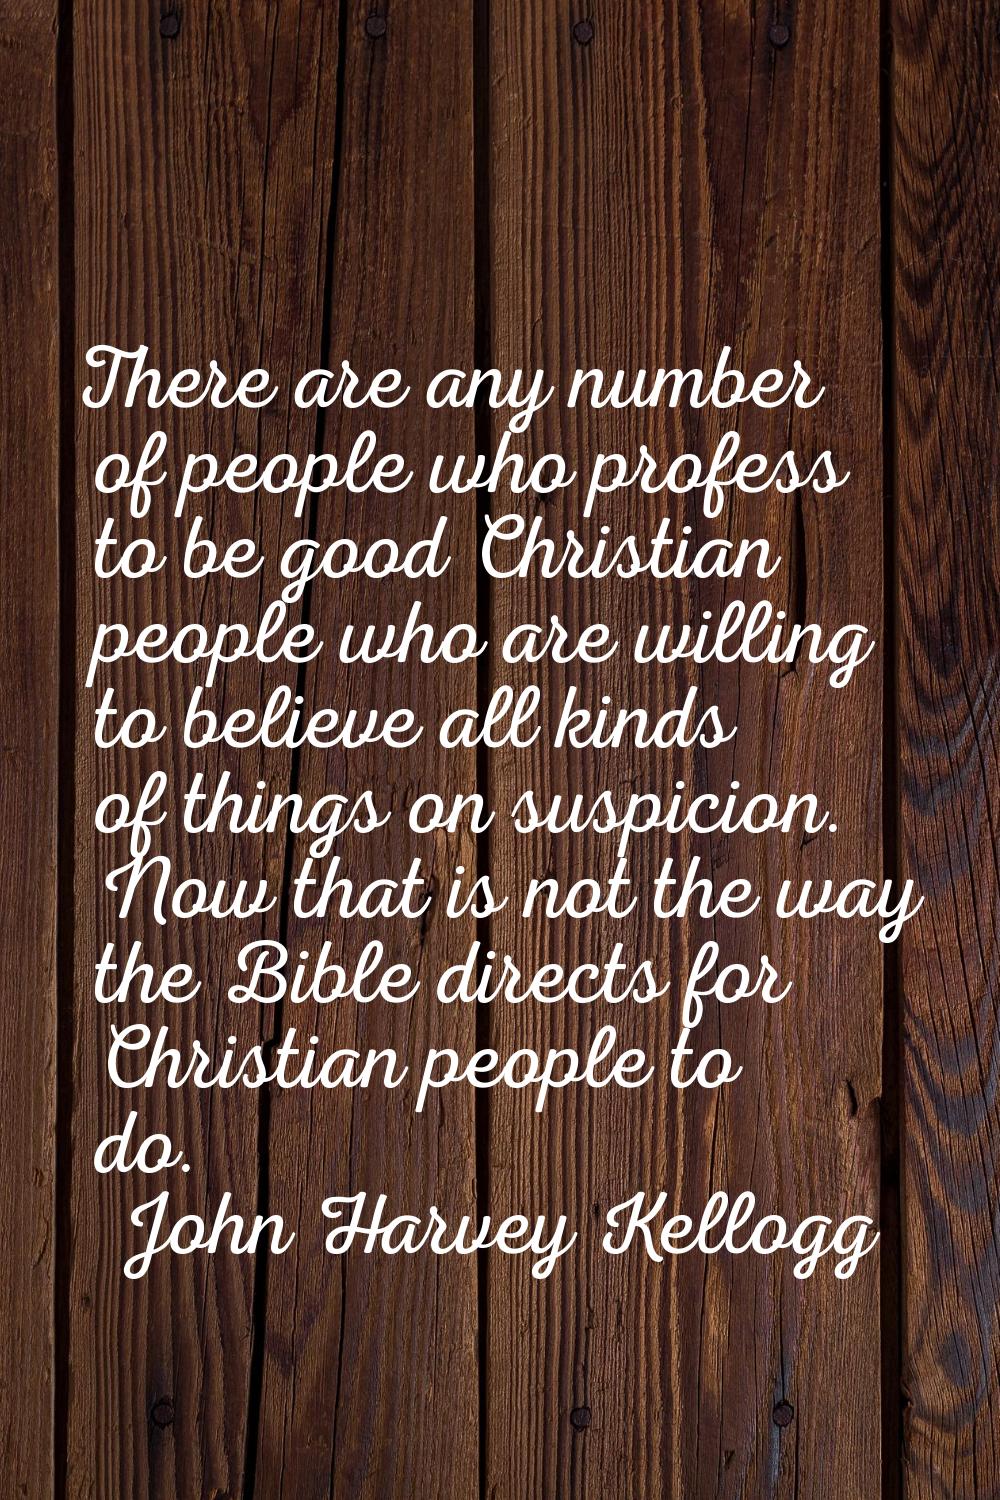 There are any number of people who profess to be good Christian people who are willing to believe a